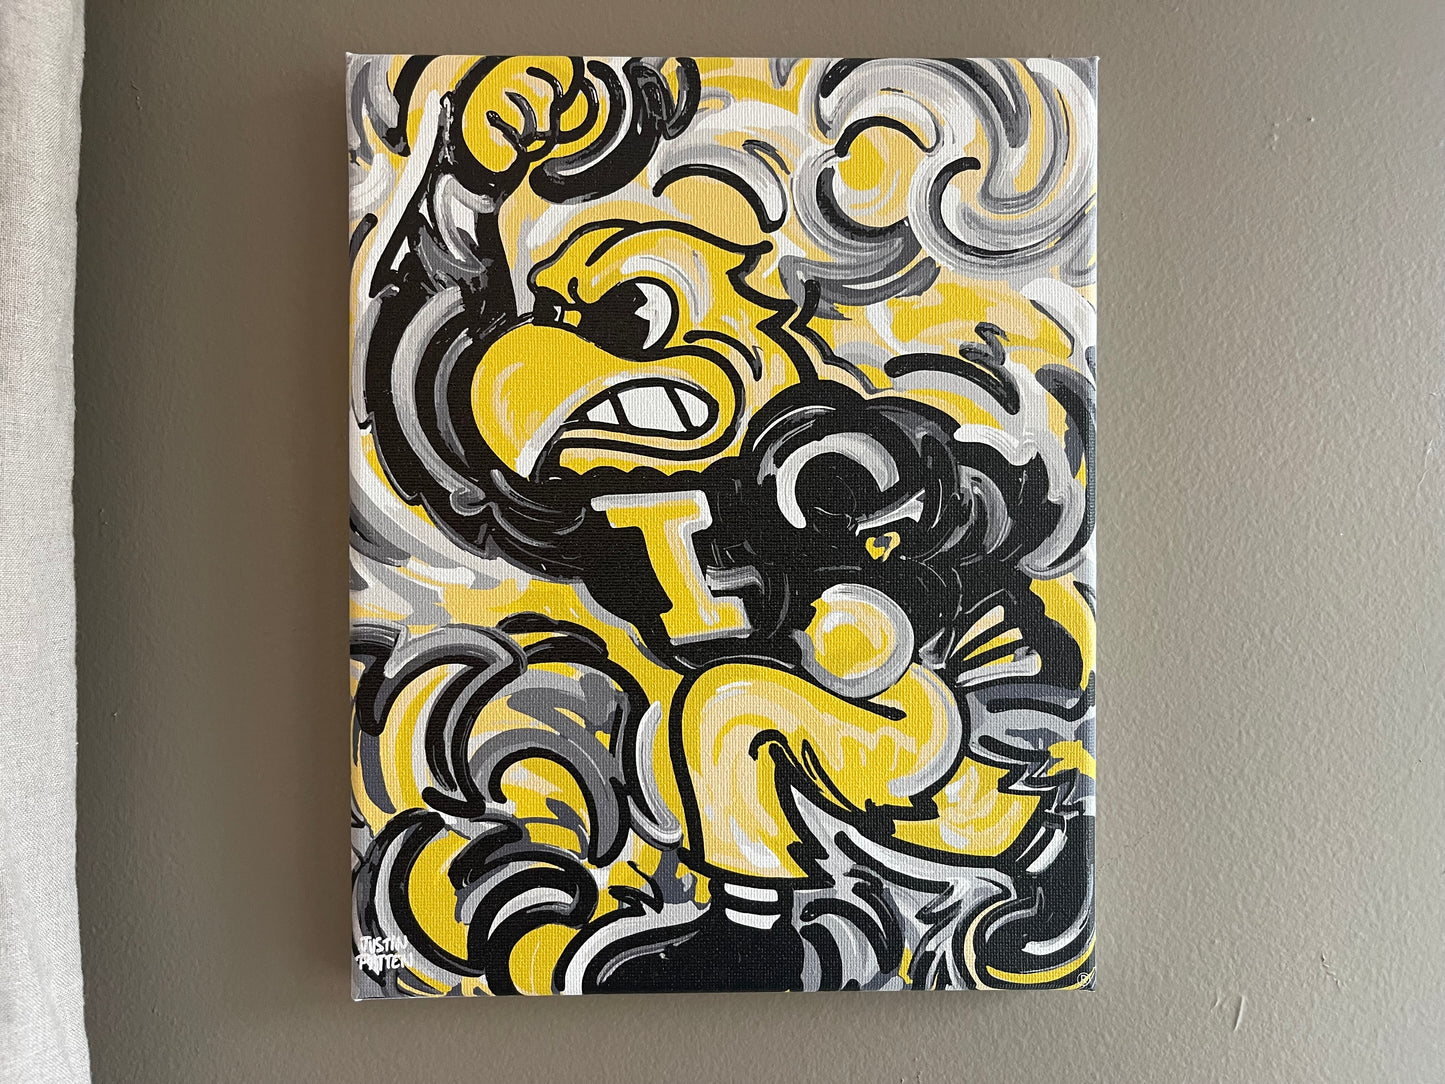 University of Iowa, Herky the Hawk, 8" x 10" Wrapped Canvas Print by Justin Patten